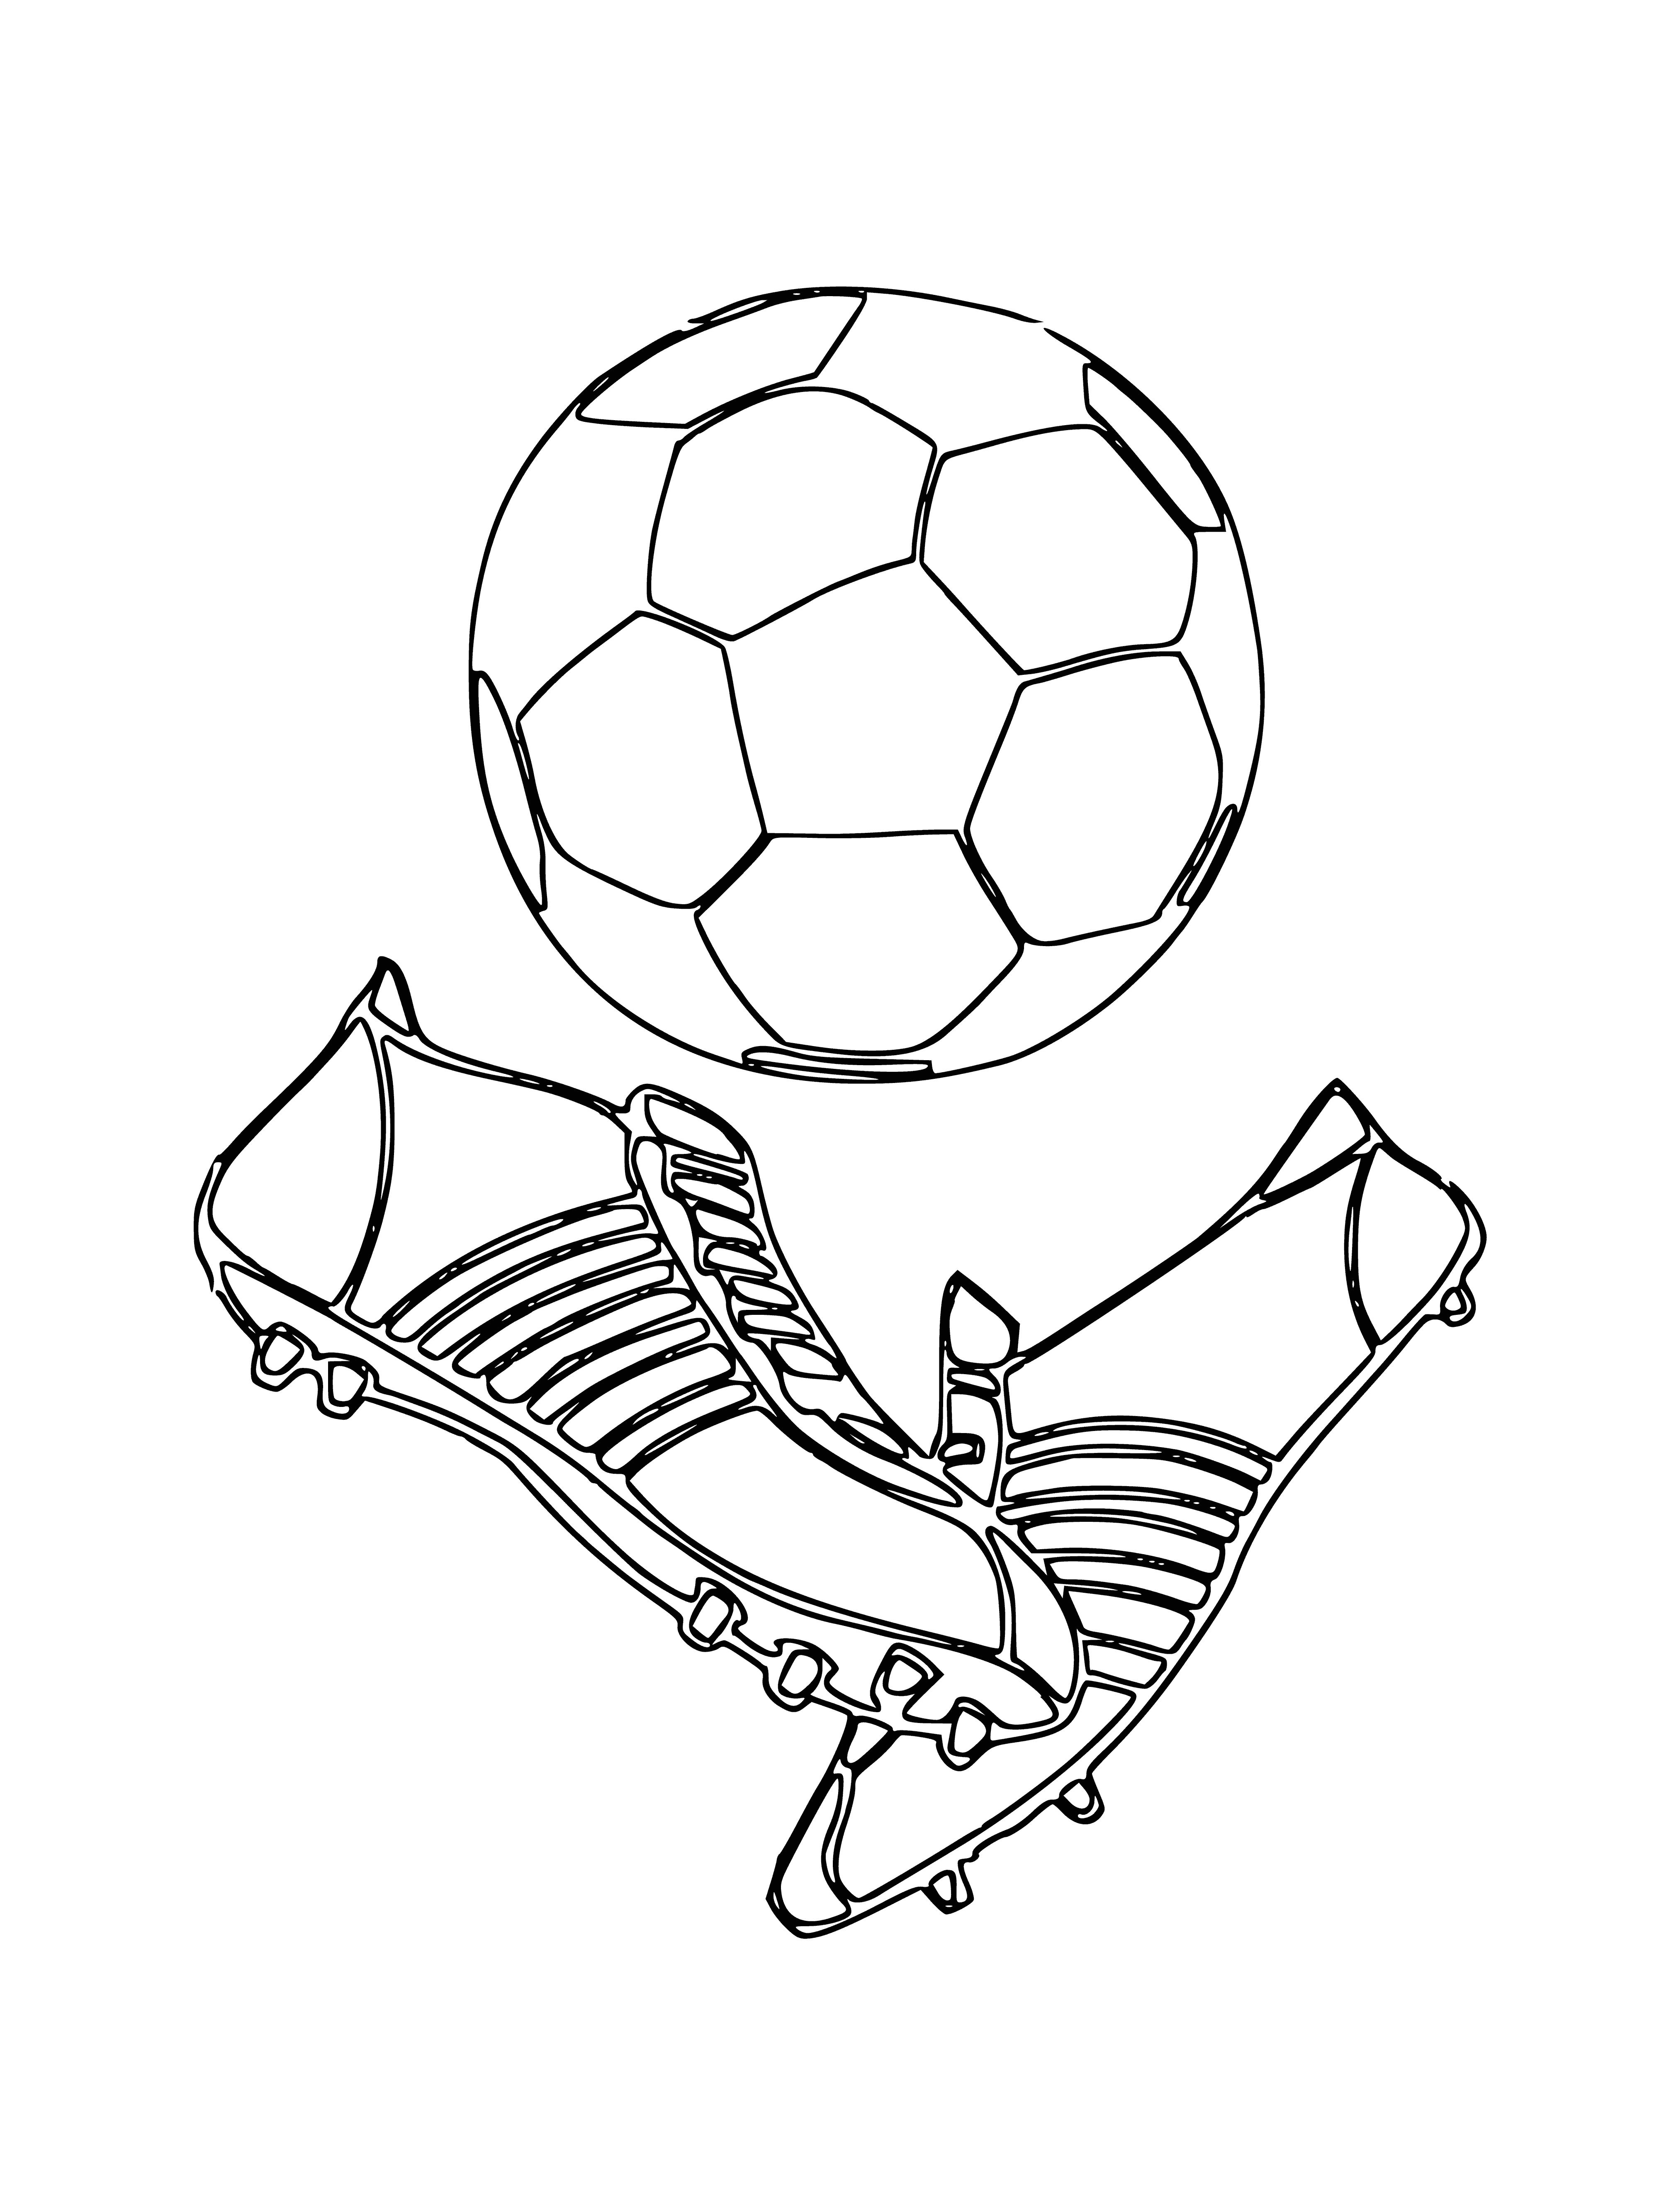 coloring page: #soccer #coloringpage